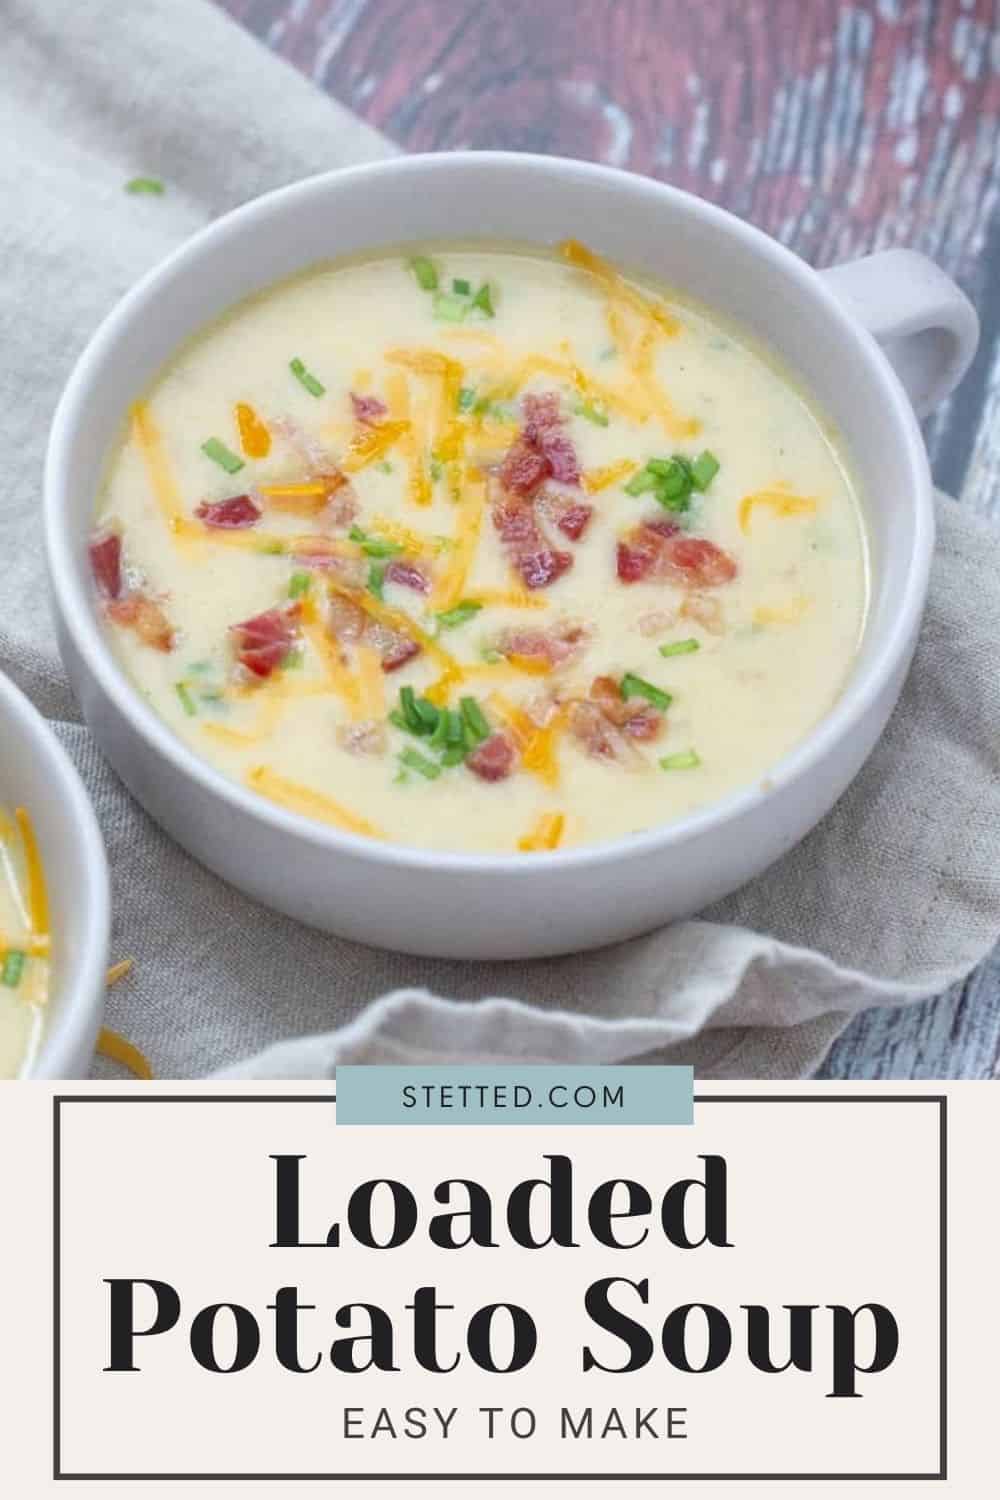 Baked Potato Soup - stetted